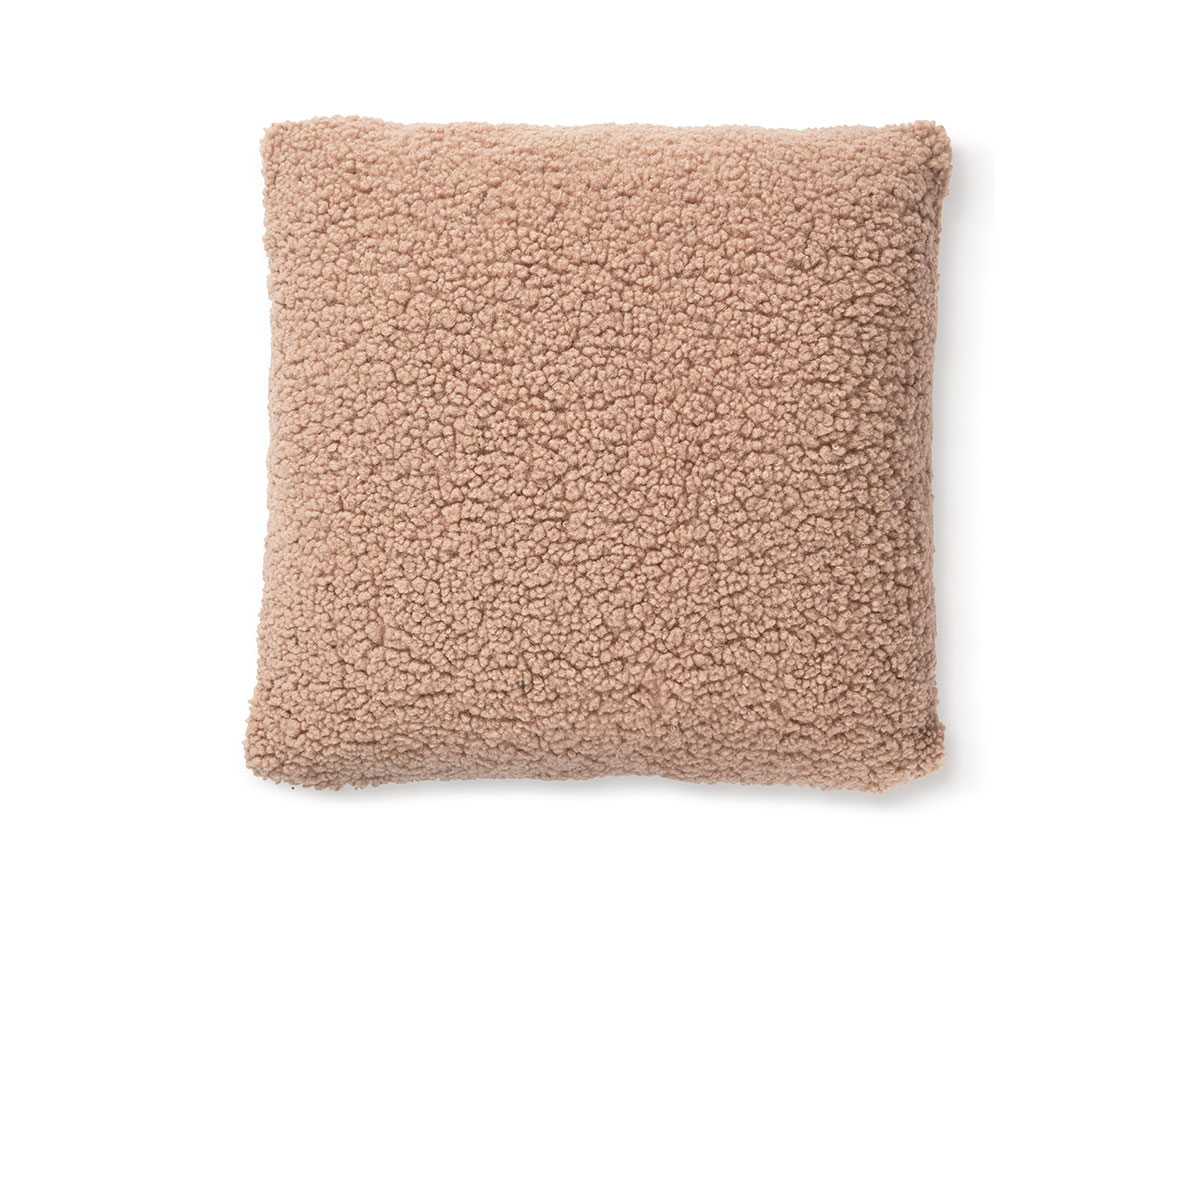 Bedding House Bedding House Sherpa Filled Square Cushion 